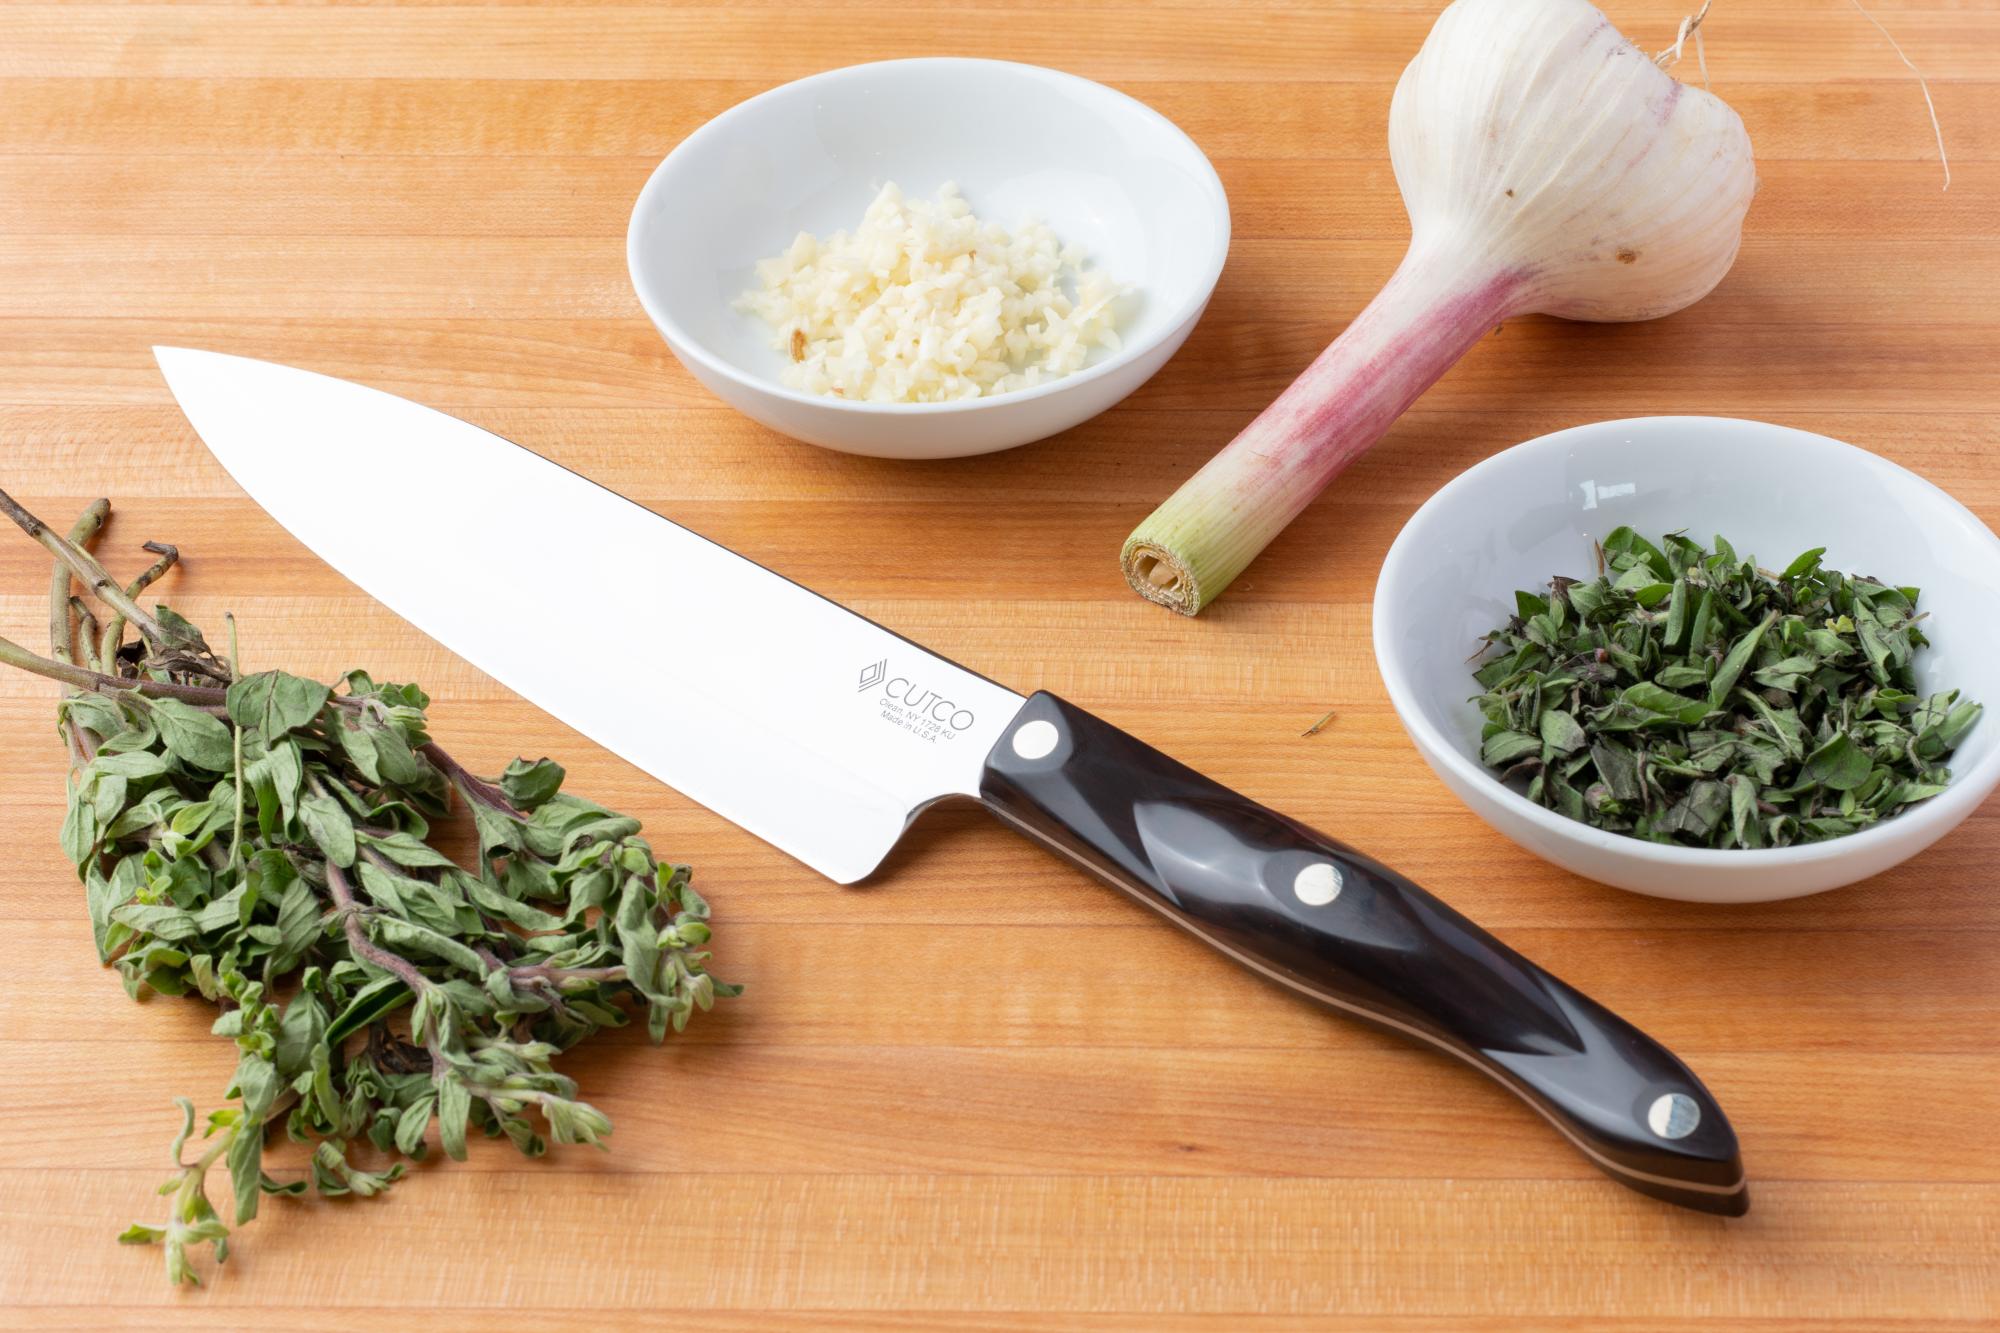 Use the Petite Chef for the garlic and fresh oregano.